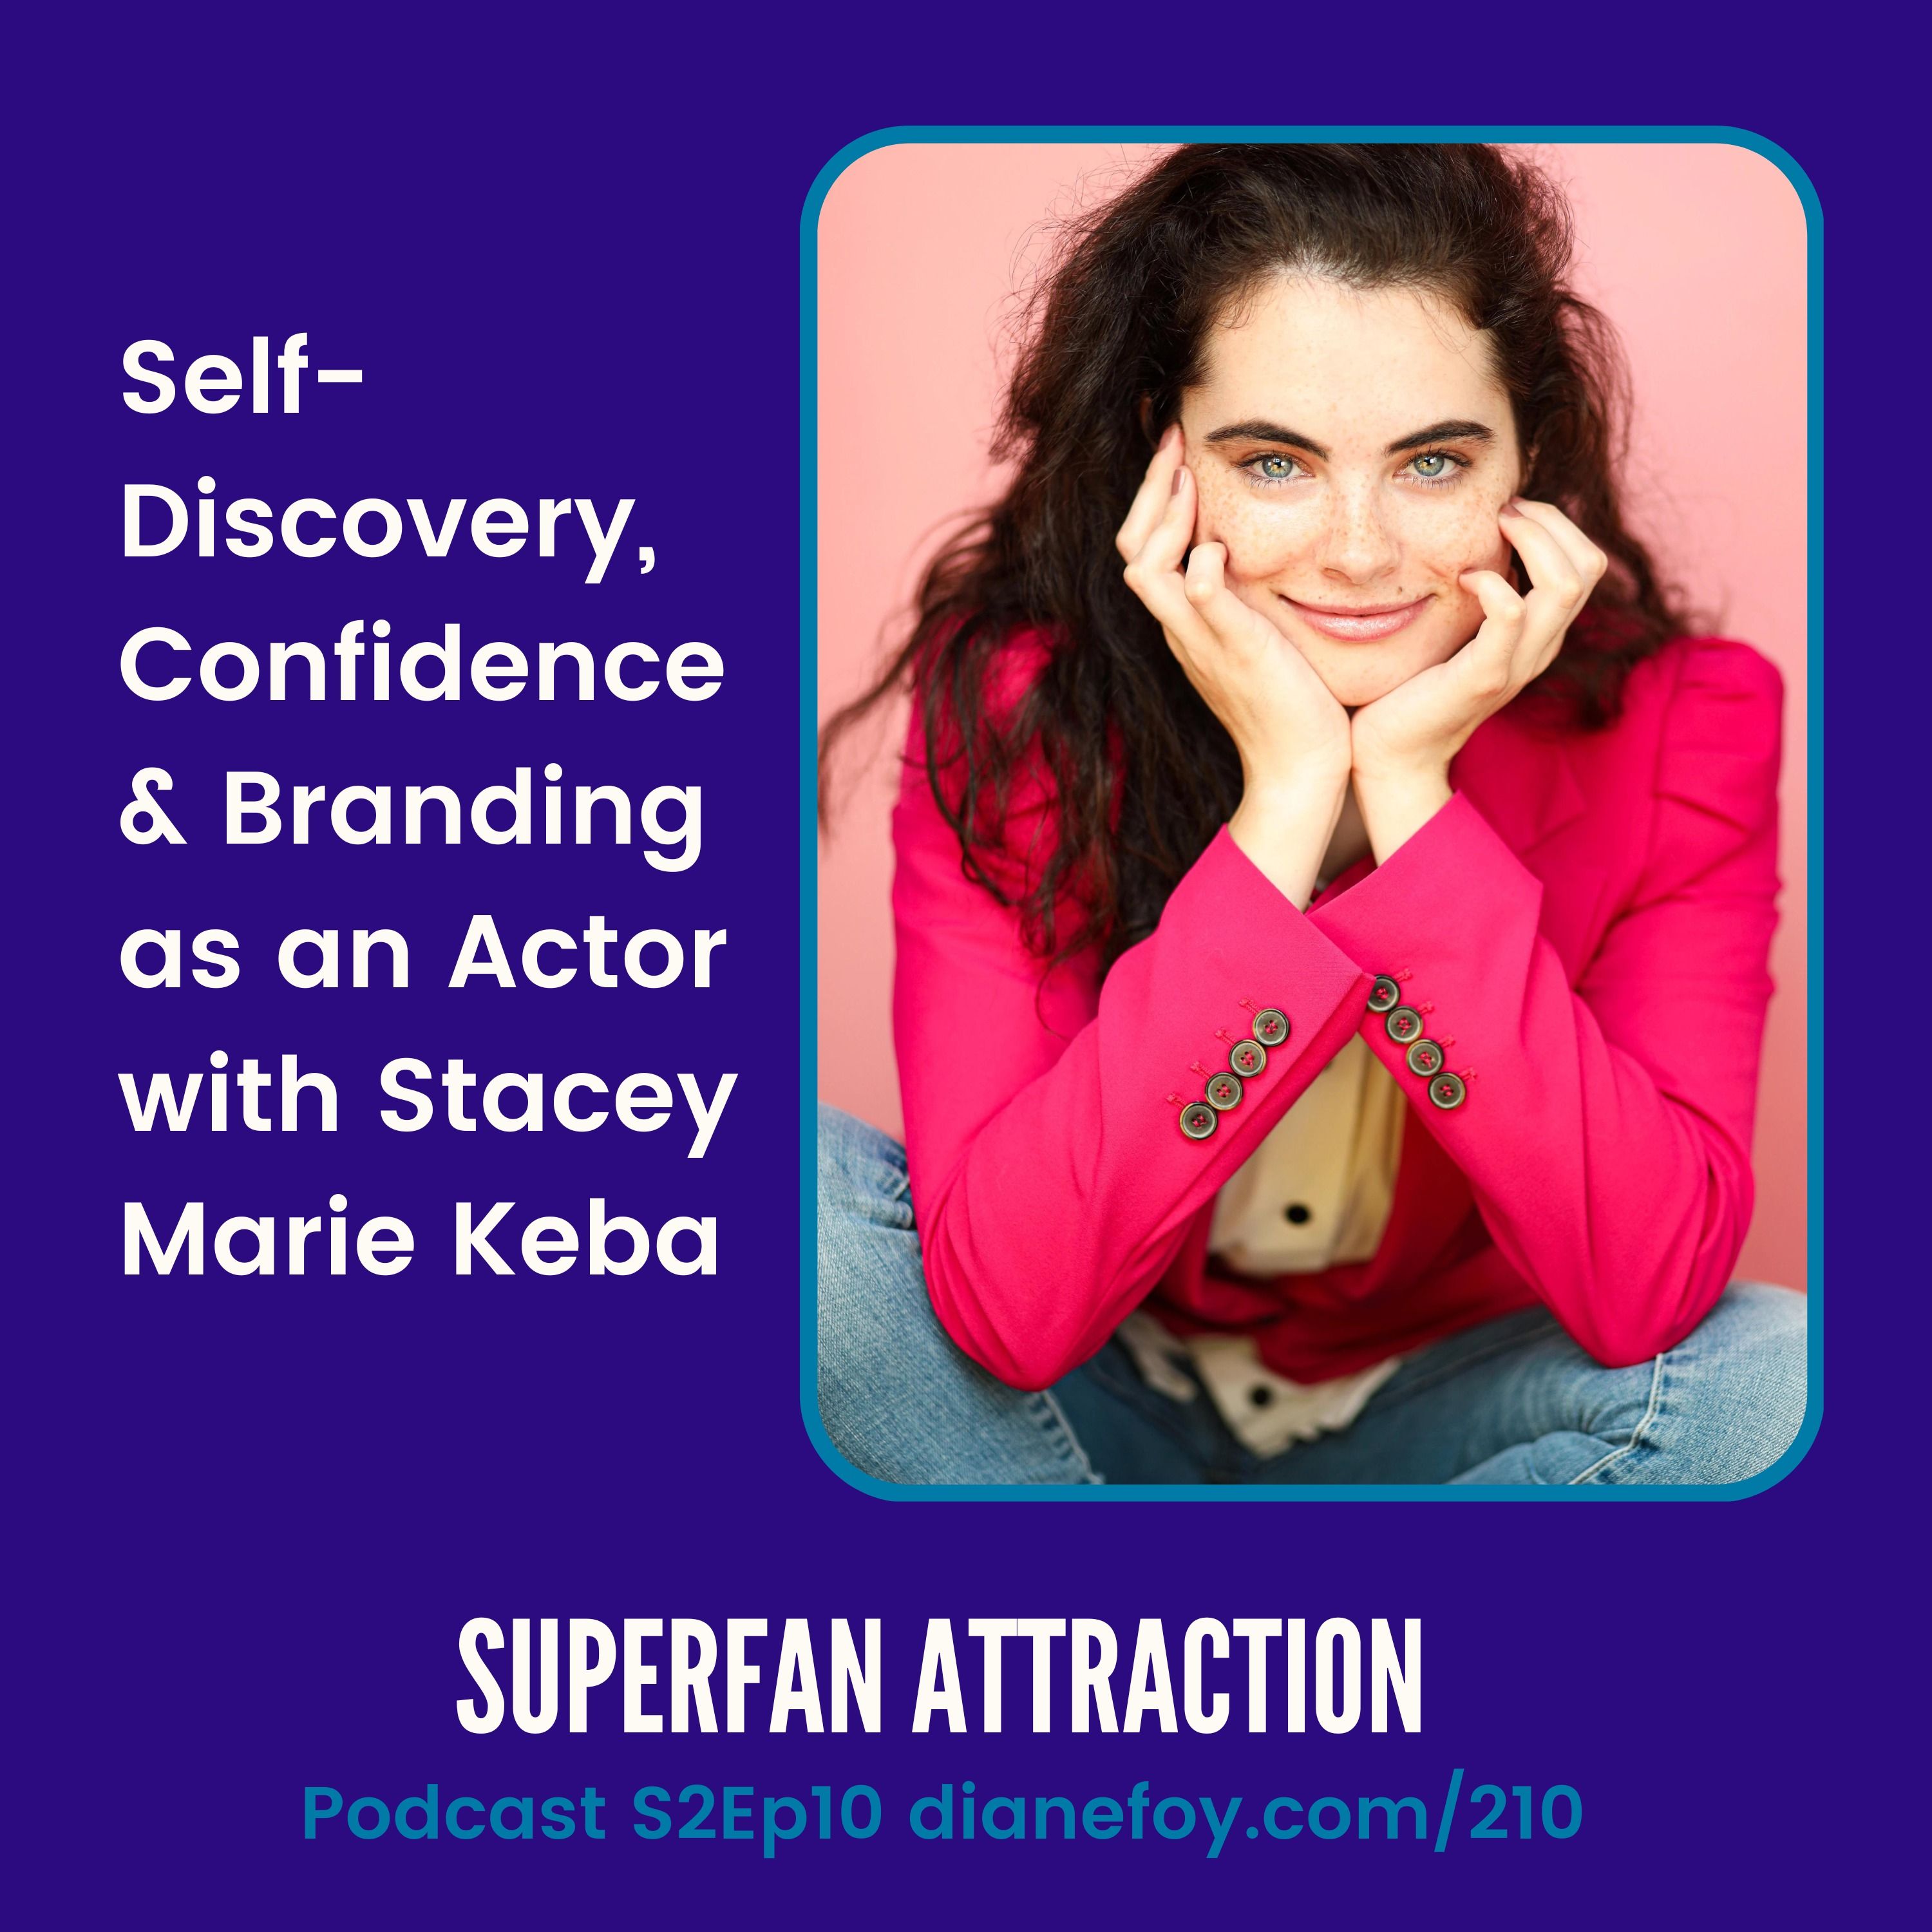 Self-Discovery, Confidence & Branding with Actor Stacey Marie Keba hero artwork